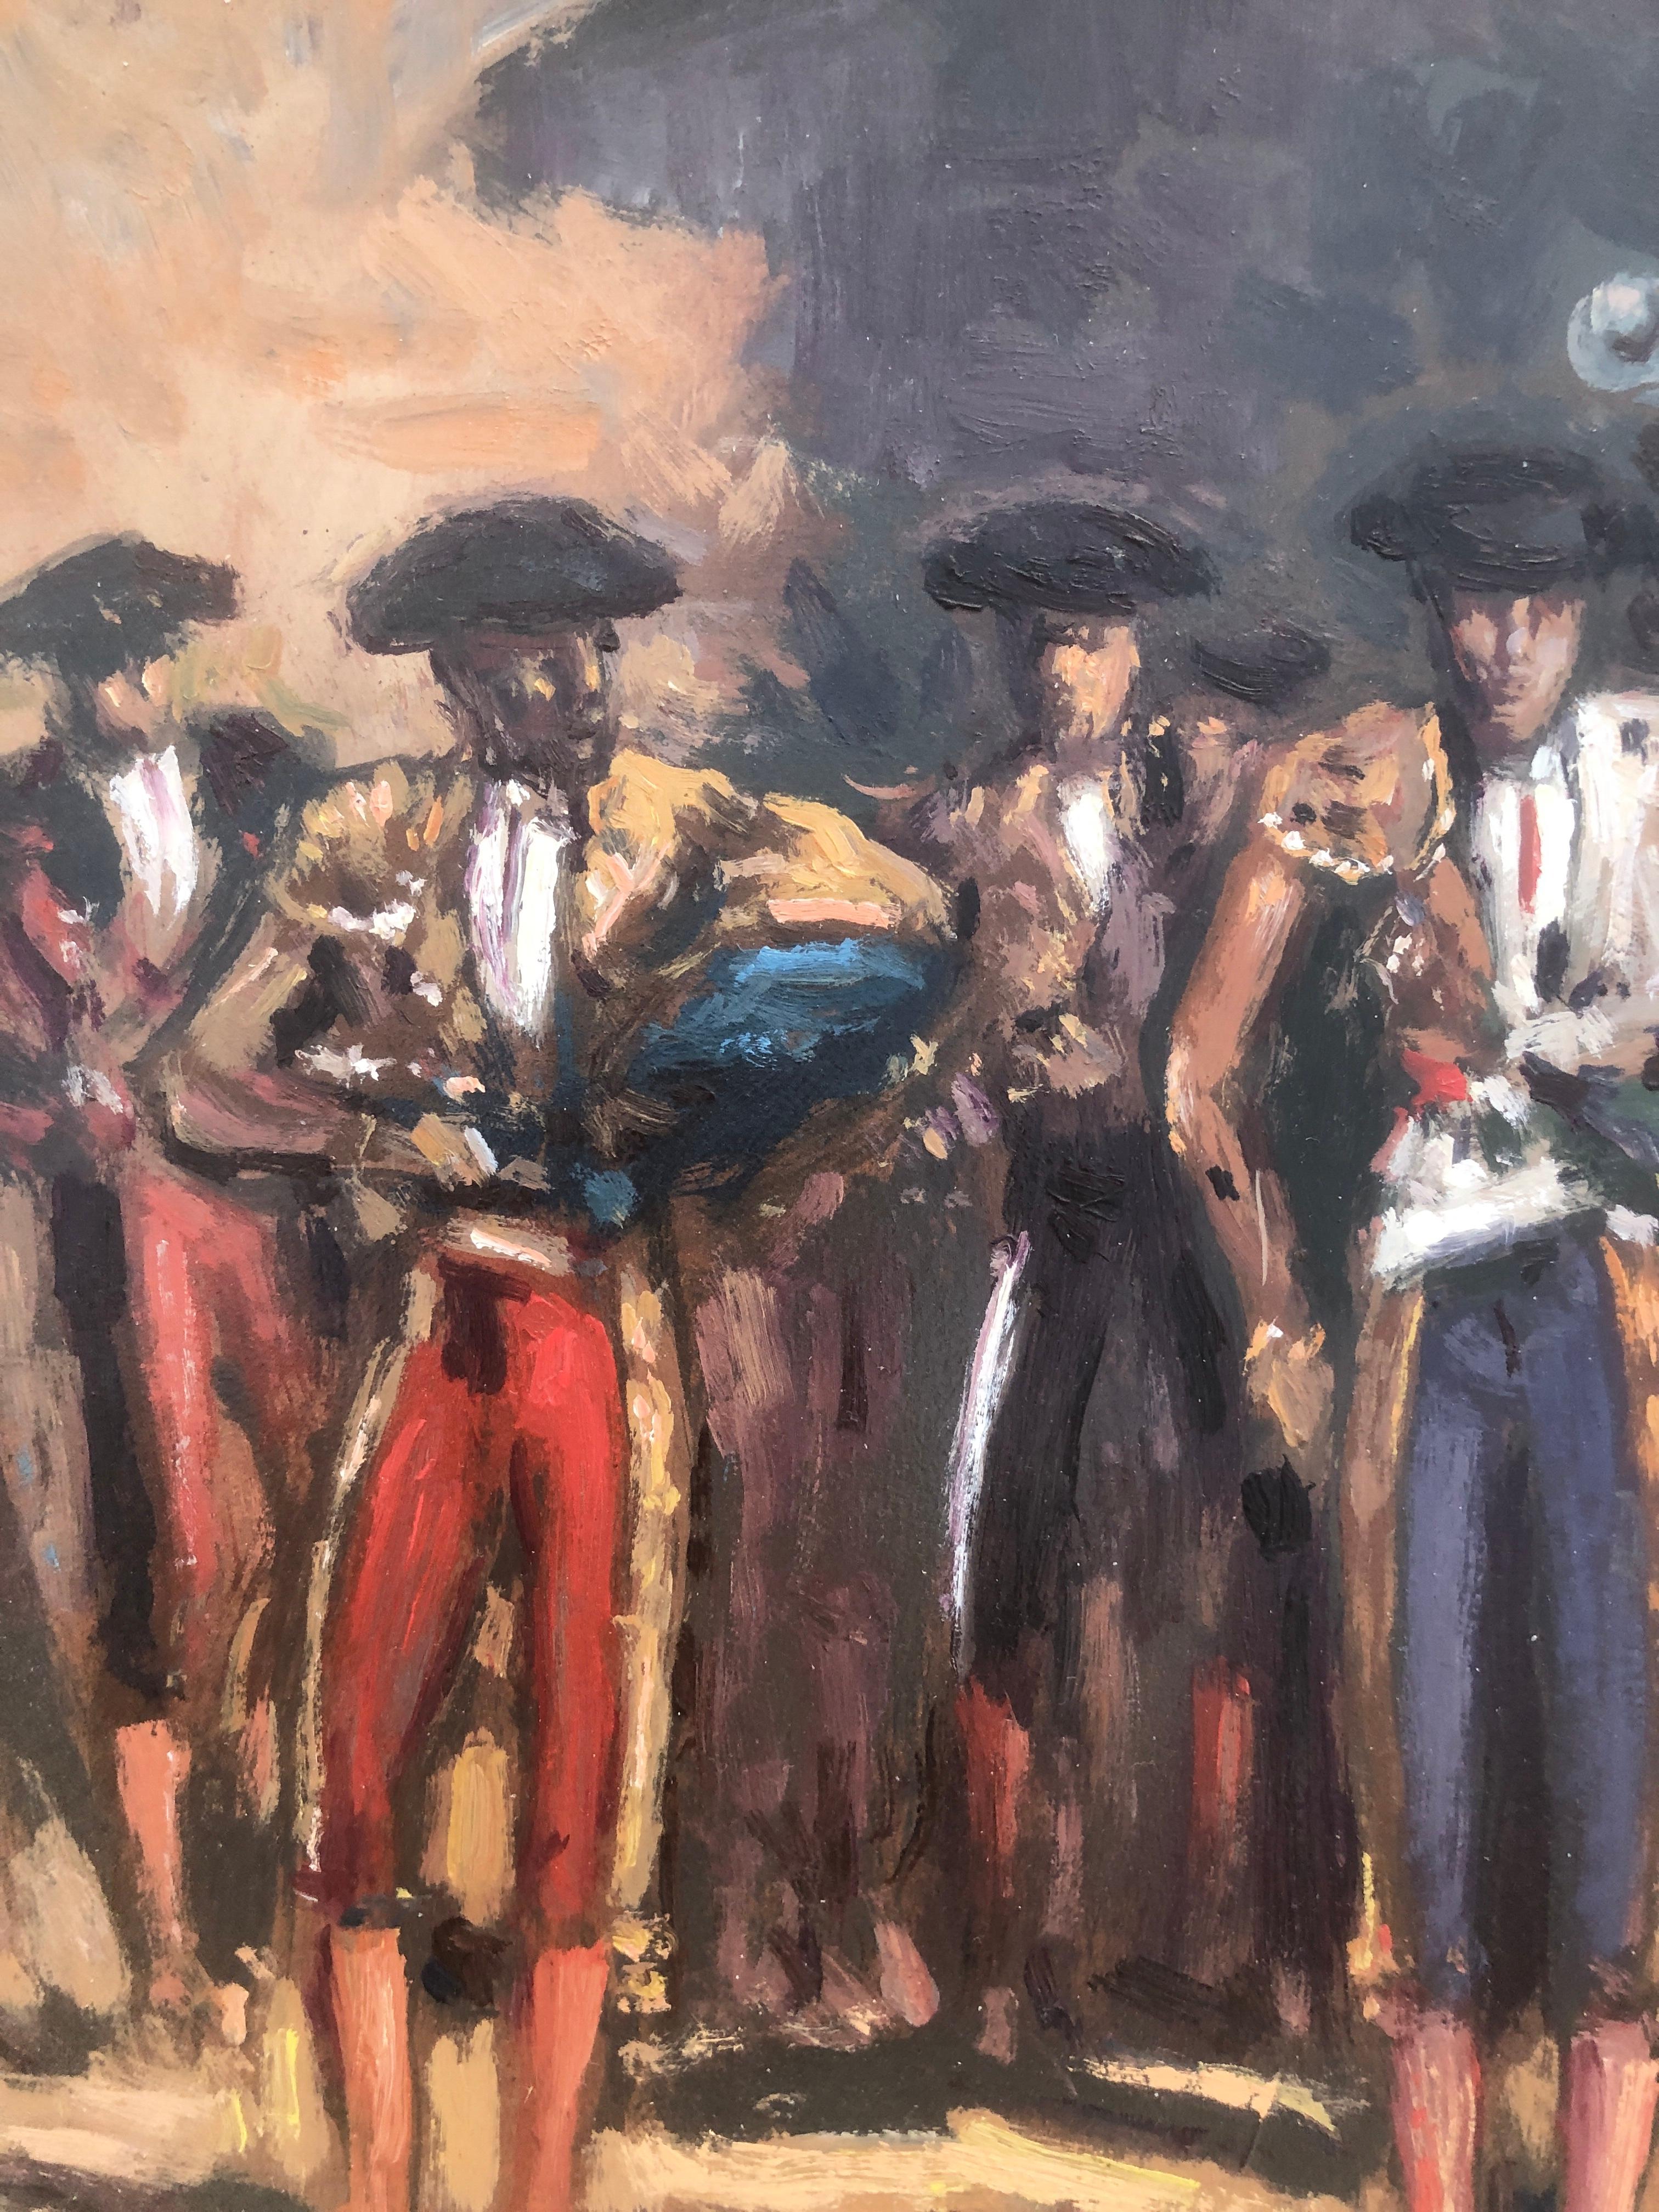 gang of bullfighters Spain oil on board painting - Post-Impressionist Painting by Enric Beltrán Messa